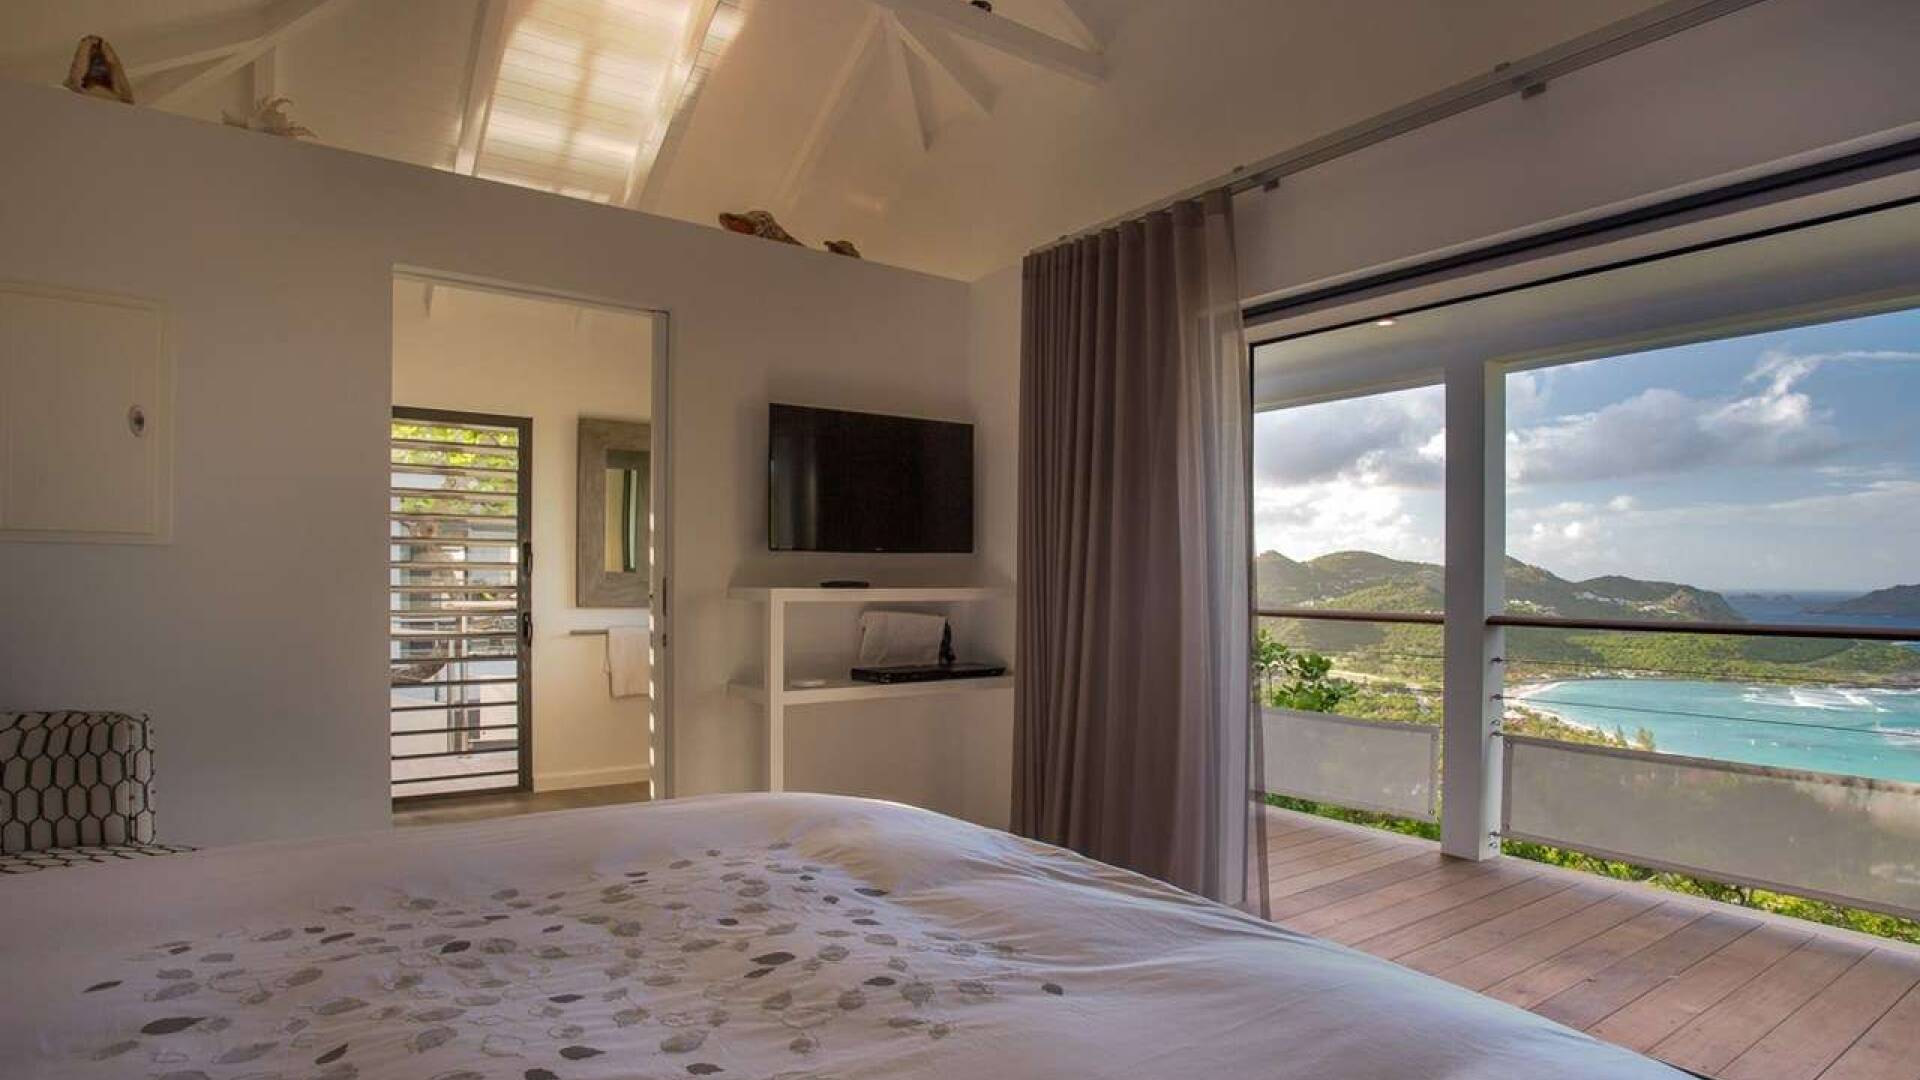 Bedroom at WV IEW, St. Jean, St. Barthelemy